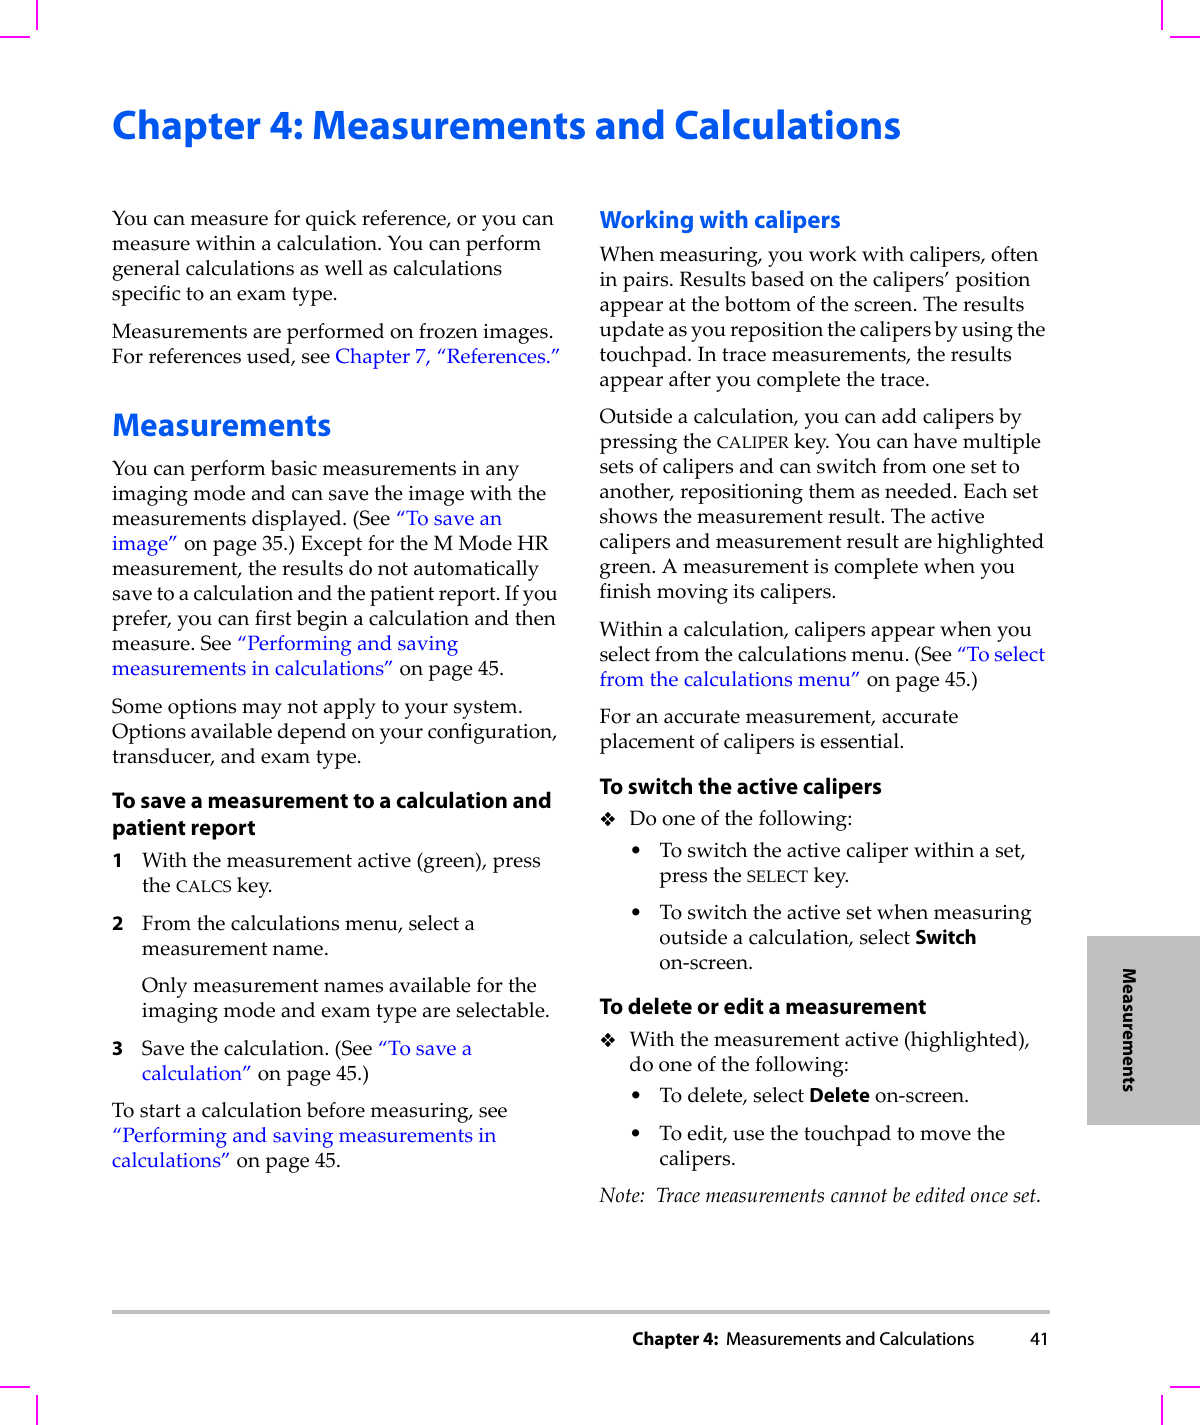 Chapter 4:  Measurements and Calculations 41MeasurementsChapter 4: Measurements and CalculationsYoucanmeasureforquickreference,oryoucanmeasurewithinacalculation.Youcanperformgeneralcalculationsaswellascalculationsspecifictoanexamtype.Measurementsareperformedonfrozenimages.Forreferencesused,seeChapter 7,“References.”MeasurementsYoucanperformbasicmeasurementsinanyimagingmodeandcansavetheimagewiththemeasurementsdisplayed.(See“Tosaveanimage”onpage 35.)ExceptfortheMModeHRmeasurement,theresultsdonotautomaticallysavetoacalculationandthepatientreport.Ifyouprefer,youcanfirstbeginacalculationandthenmeasure.See“Performingandsavingmeasurementsincalculations”onpage 45.Someoptionsmaynotapplytoyoursystem.Optionsavailabledependonyourconfiguration,transducer,andexamtype.To save a measurement to a calculation and patient report1Withthemeasurementactive(green),presstheCALCSkey.2Fromthecalculationsmenu,selectameasurementname.Onlymeasurementnamesavailablefortheimagingmodeandexamtypeareselectable.3Savethecalculation.(See“Tosaveacalculation”onpage 45.)Tostartacalculationbeforemeasuring,see“Performingandsavingmeasurementsincalculations”onpage 45.Working with calipersWhenmeasuring,youworkwithcalipers,ofteninpairs.Resultsbasedonthecalipers’positionappearatthebottomofthescreen.Theresultsupdateasyourepositionthecalipersbyusingthetouchpad.Intracemeasurements,theresultsappearafteryoucompletethetrace.Outsideacalculation,youcanaddcalipersbypressingtheCALIPERkey.Youcanhavemultiplesetsofcalipersandcanswitchfromonesettoanother,repositioningthemasneeded.Eachsetshowsthemeasurementresult.Theactivecalipersandmeasurementresultarehighlightedgreen.Ameasurementiscompletewhenyoufinishmovingitscalipers.Withinacalculation,calipersappearwhenyouselectfromthecalculationsmenu.(See“Toselectfromthecalculationsmenu”onpage 45.)Foranaccuratemeasurement,accurateplacementofcalipersisessential.To switch the active calipersDooneofthefollowing:•Toswitchtheactivecaliperwithinaset,presstheSELECTkey.•Toswitchtheactivesetwhenmeasuringoutsideacalculation,selectSwitchon‐screen.To delete or edit a measurementWiththemeasurementactive(highlighted),dooneofthefollowing:•Todelete,selectDeleteon‐screen.•Toedit,usethetouchpadtomovethecalipers.Note: Tracemeasurementscannotbeeditedonceset.